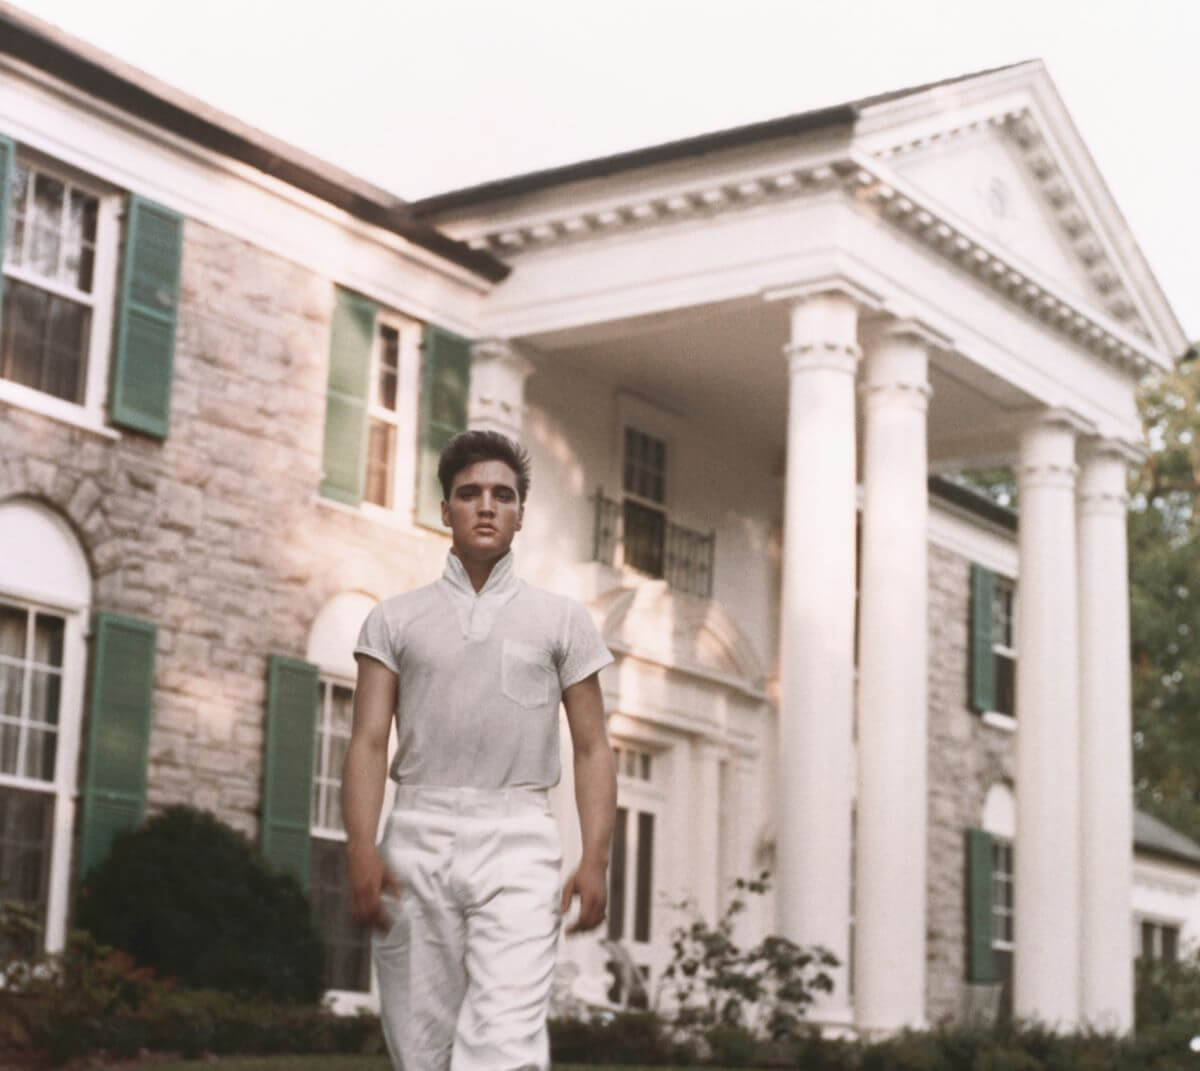 Elvis wears a white shirt with a popped collar and white pants. He stands in front of Graceland.